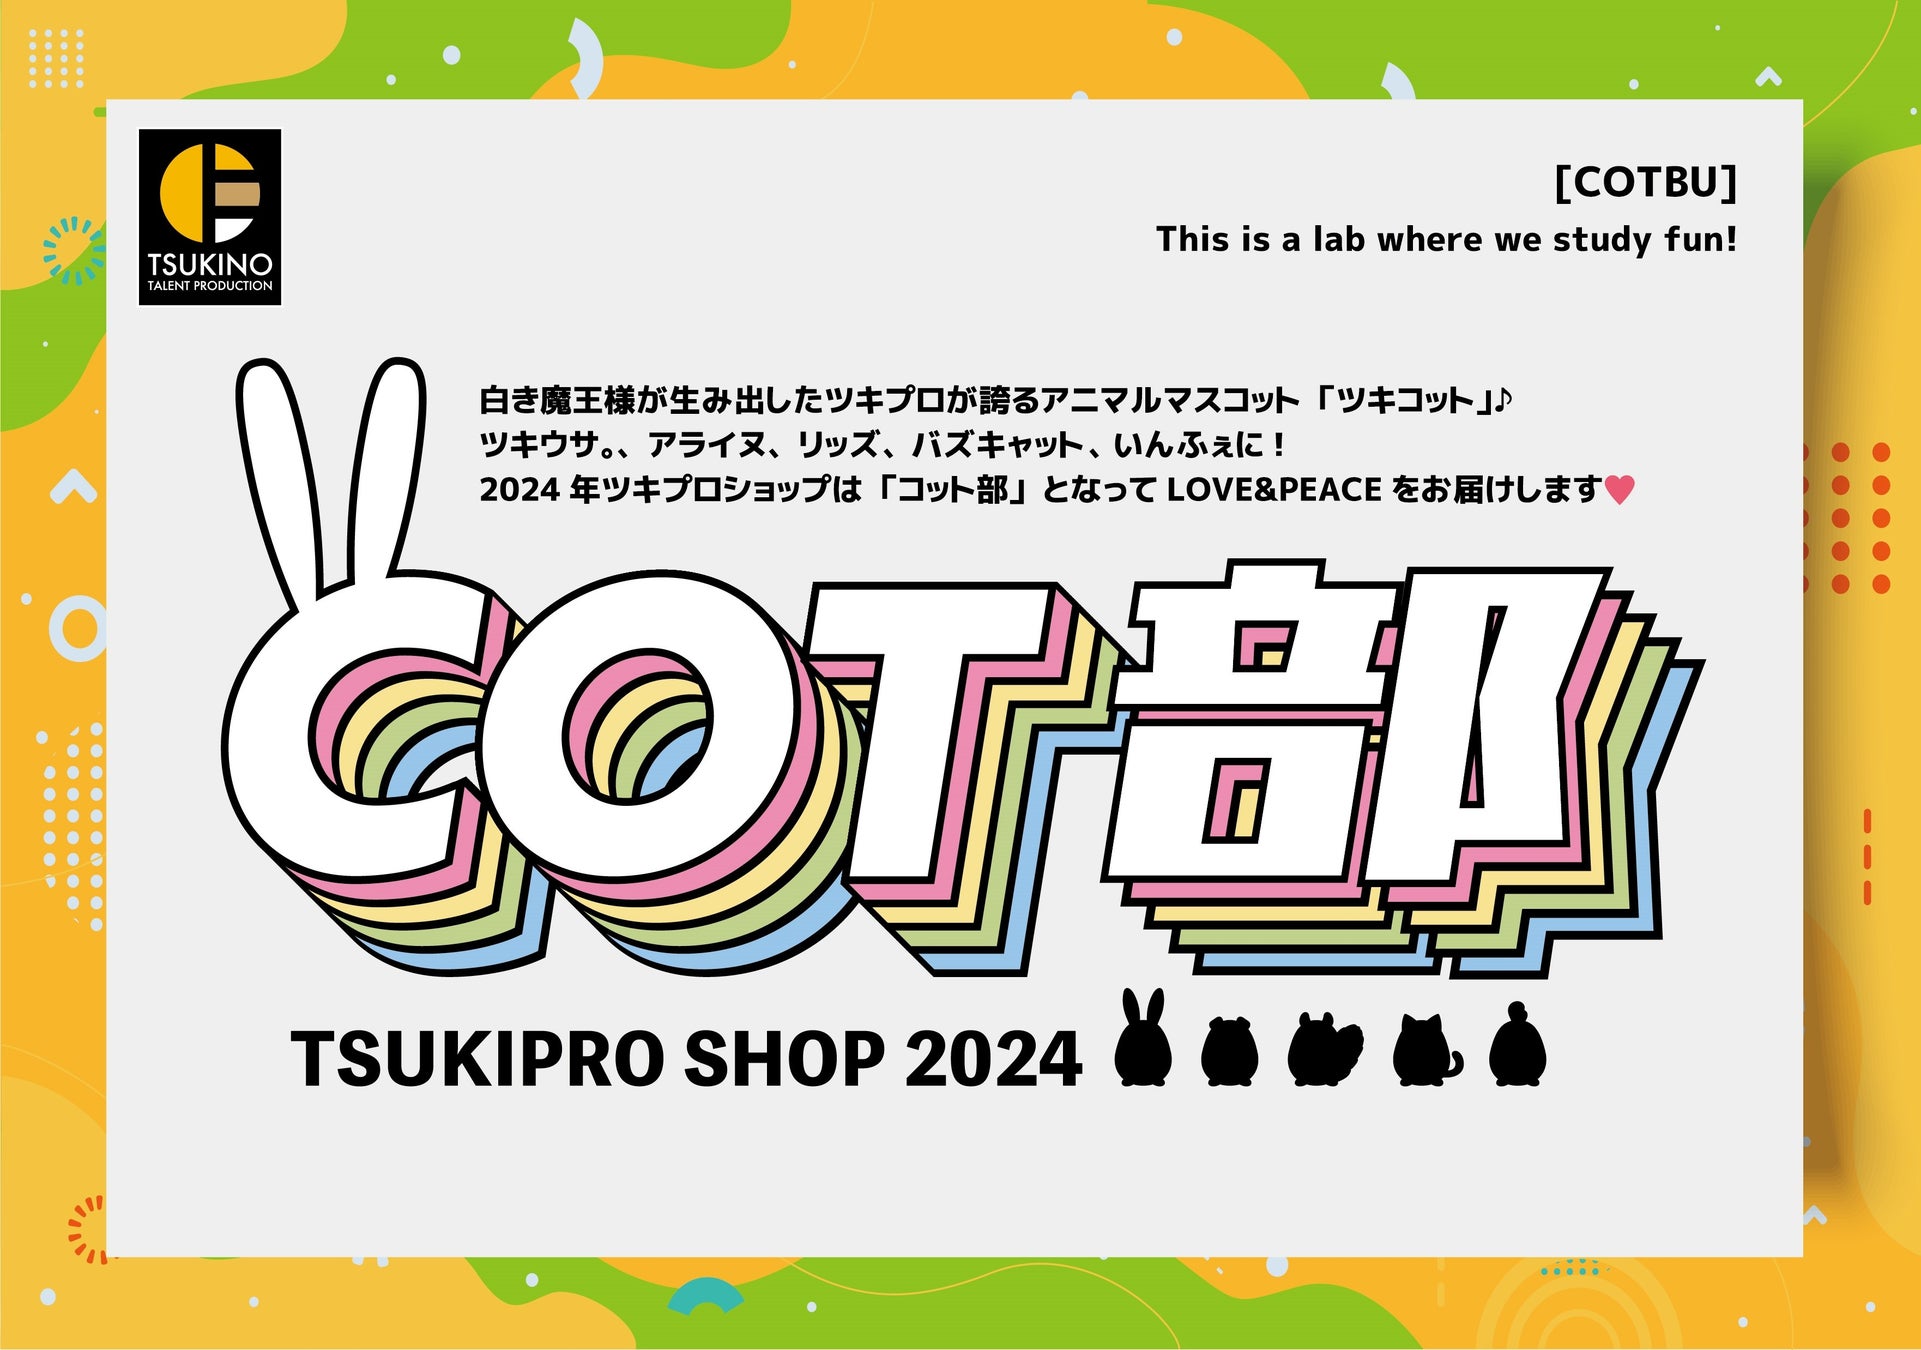 「hololive SUPER EXPO 2024」の人気グッズや展示を楽しめるポップアップストア『hololive SUPER EXPO 2024 後夜祭』を全国6会場にて開催決定